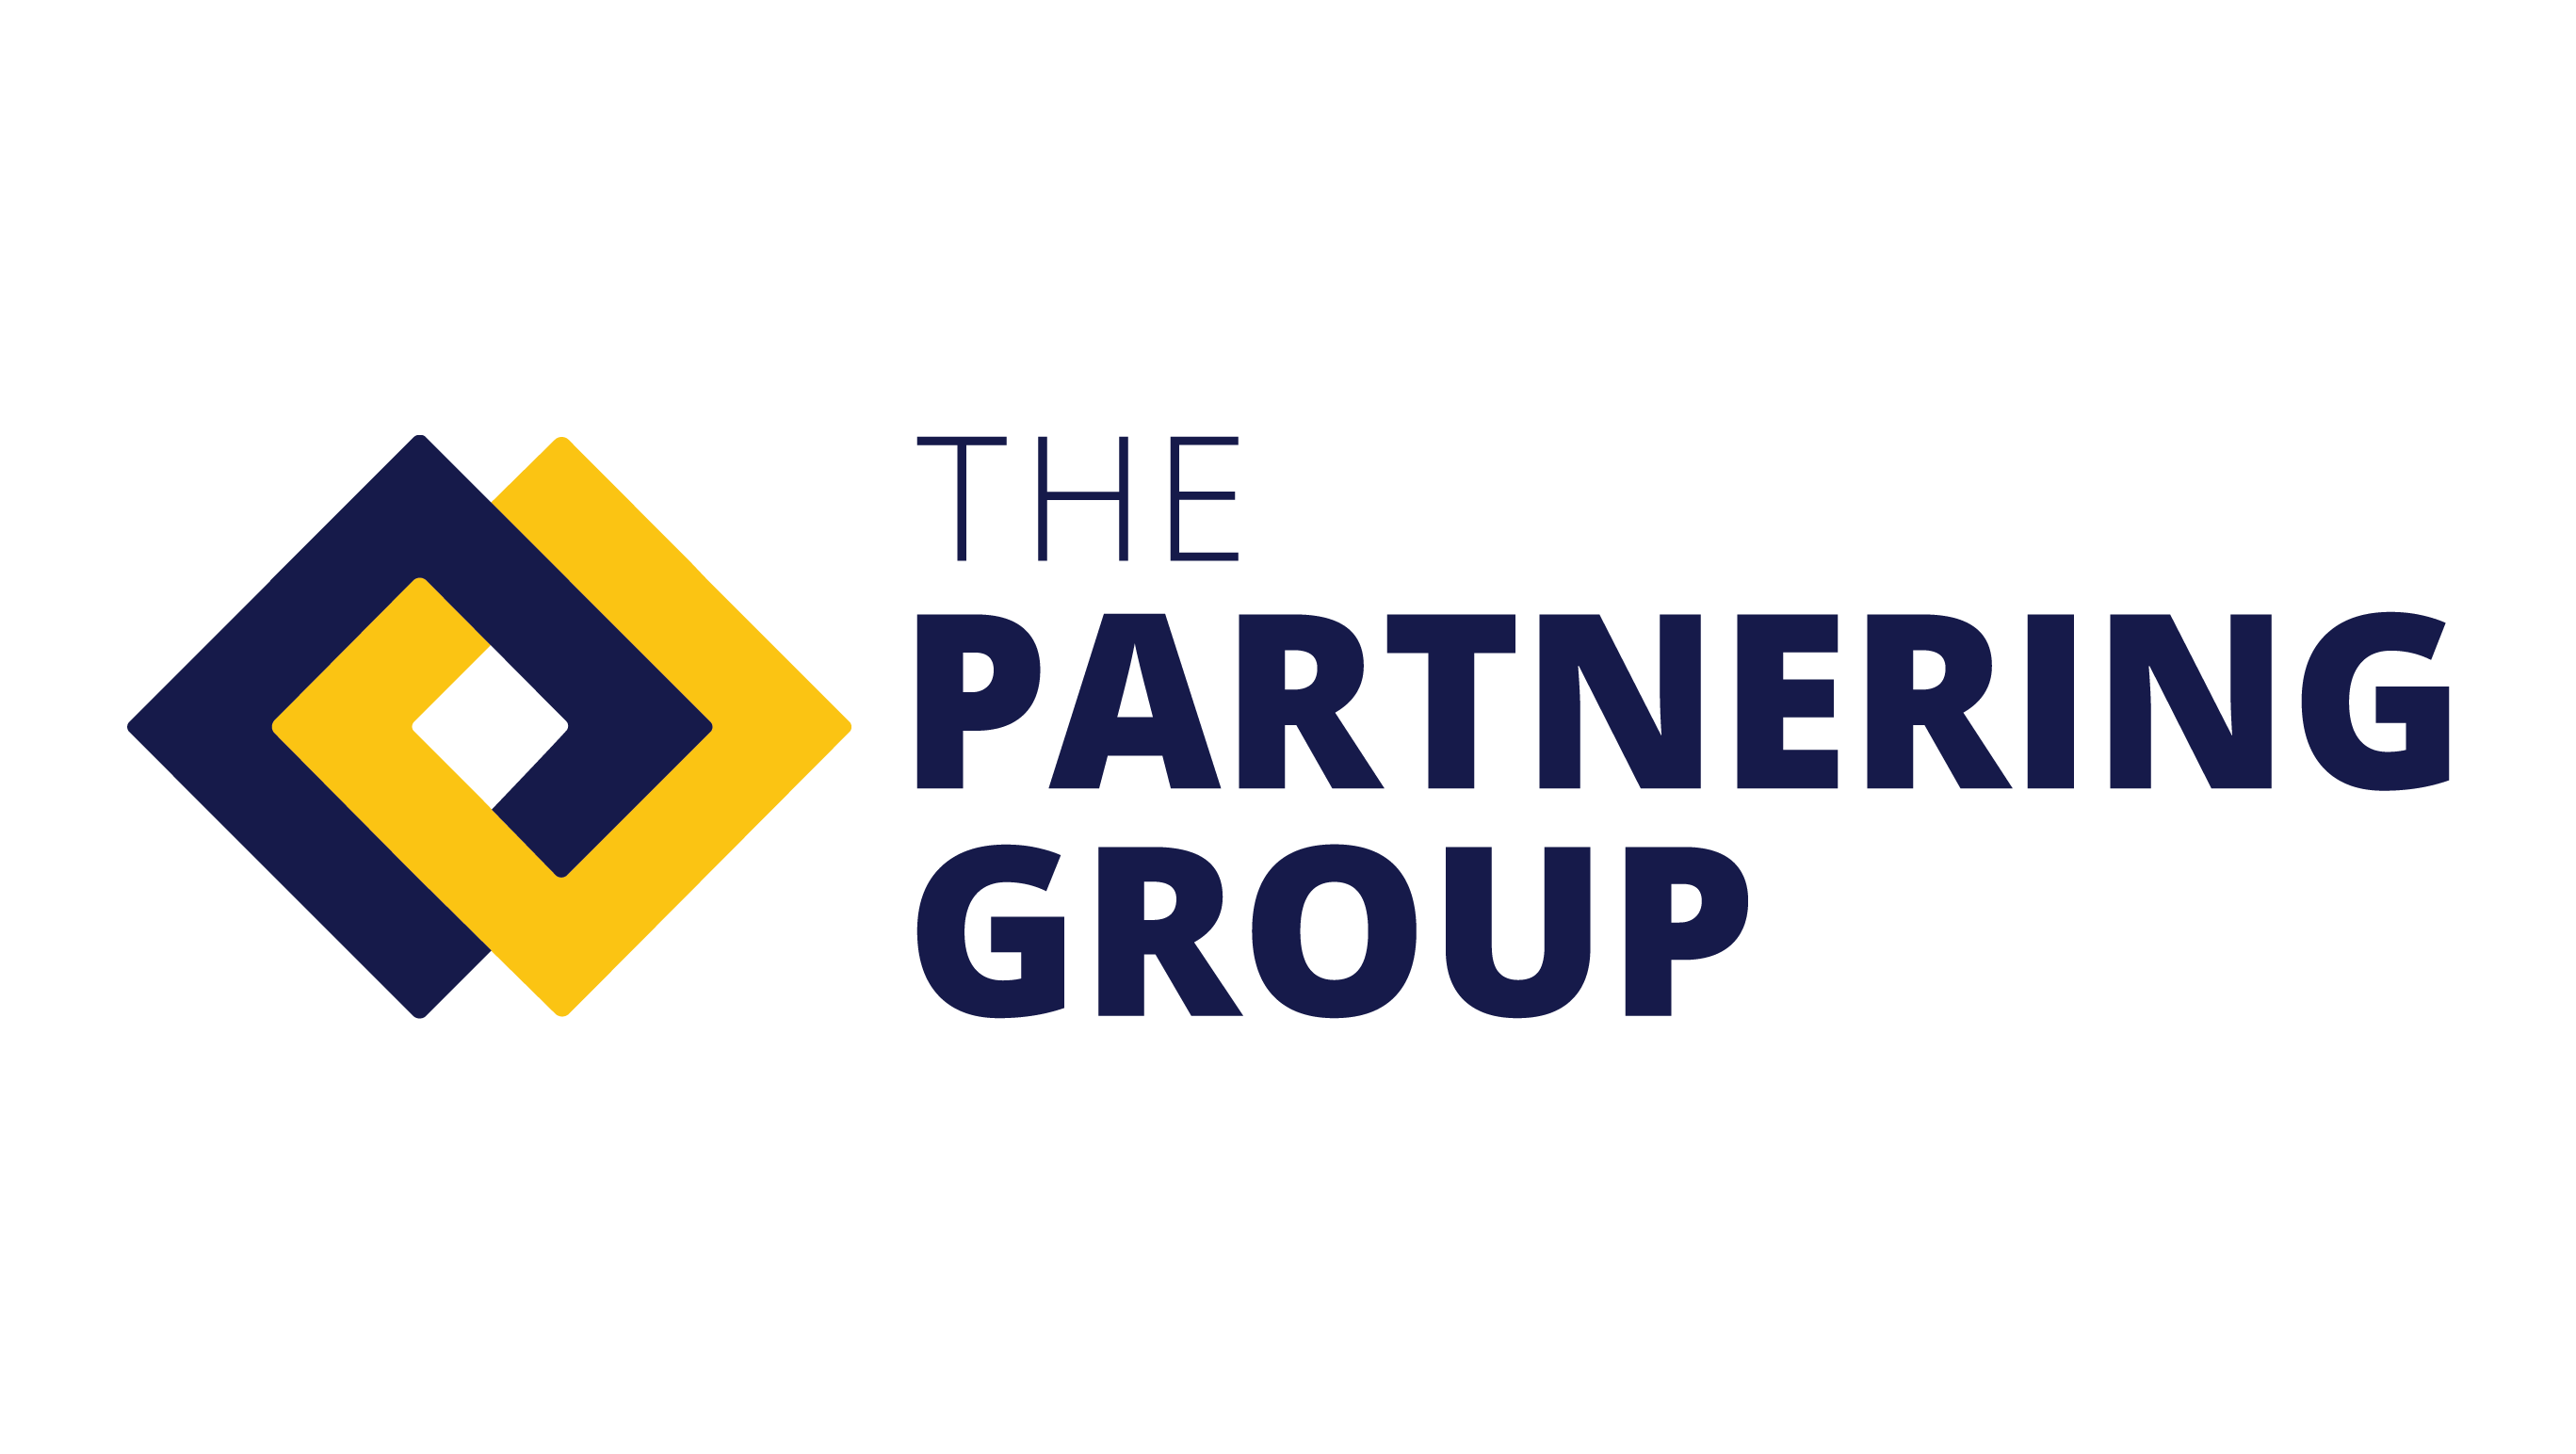 The Partnering Group